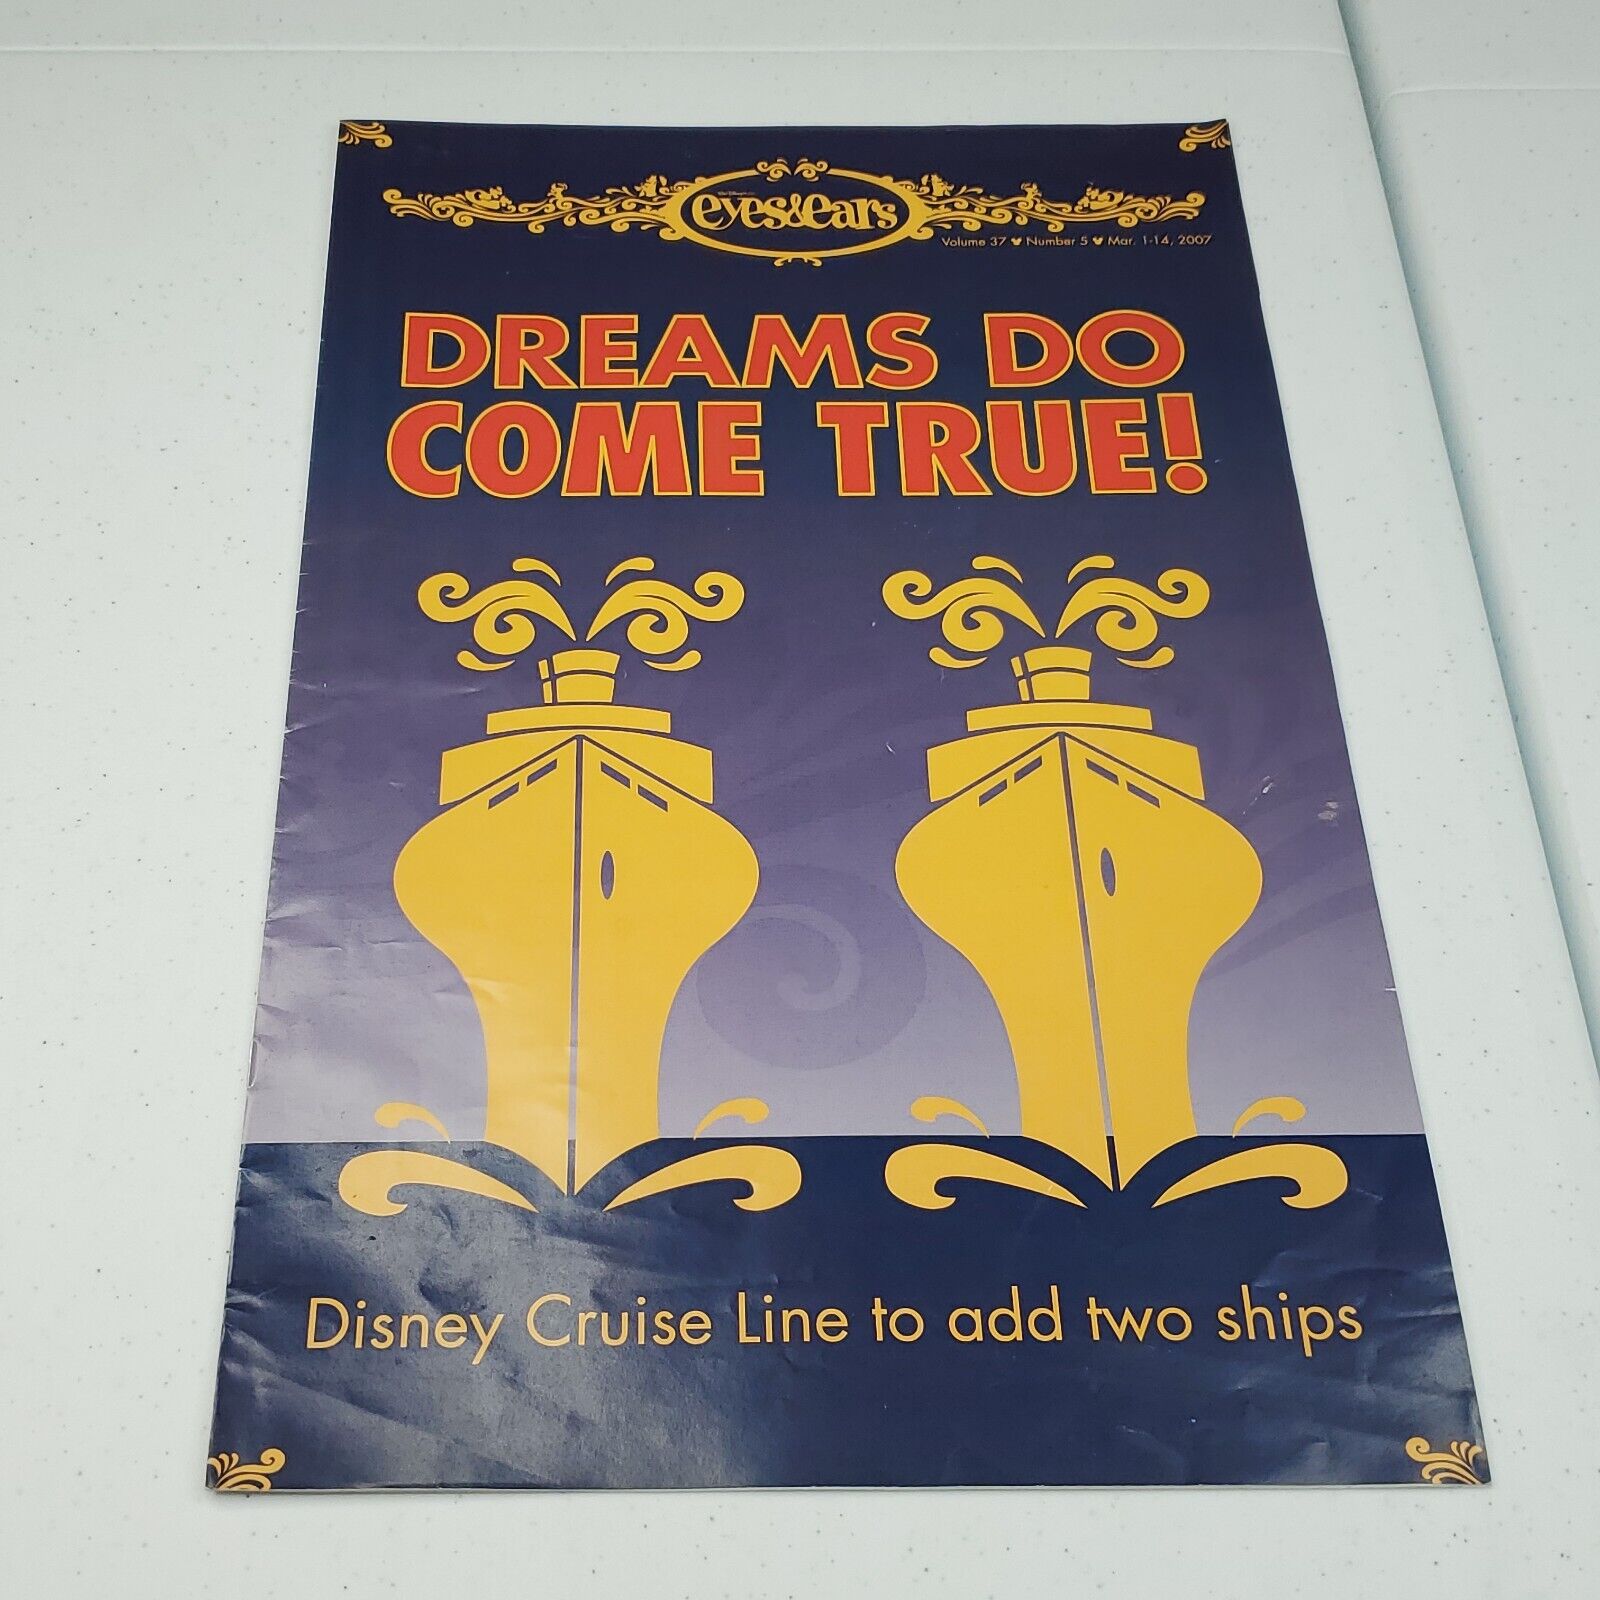 Disney Eyes & Ears Cast Member Exclusive March 2007 Disney Cruise Line New Dream